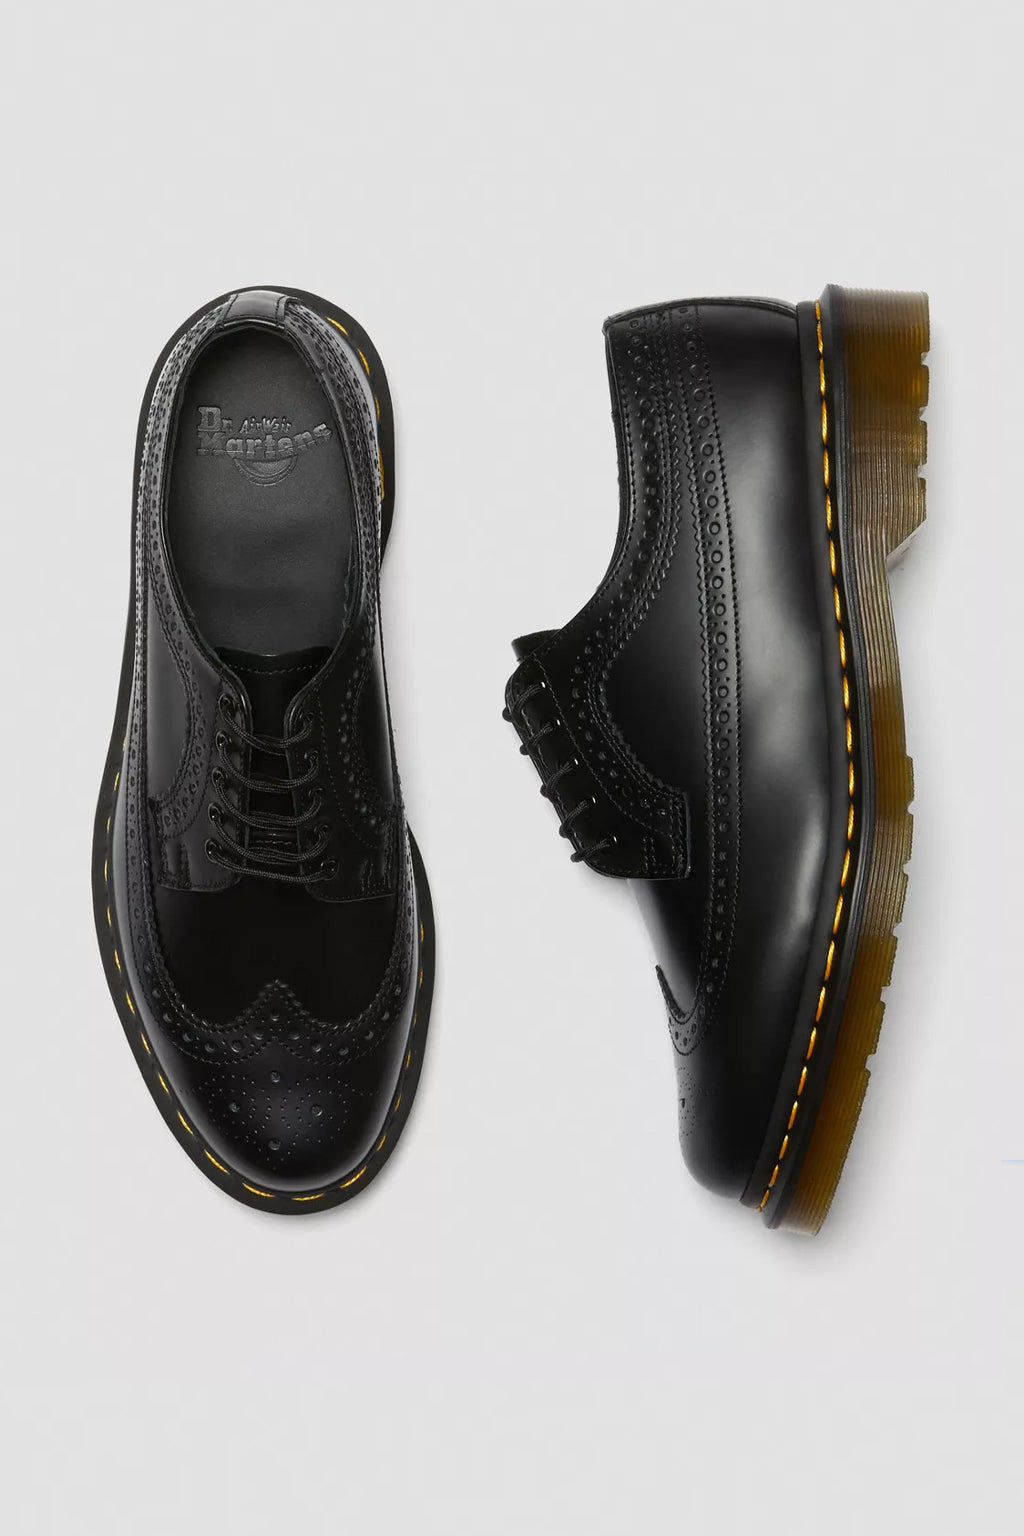 3989 Yellow Stitch Smooth Leather Brogue Shoes Shoes Dr. Martens   